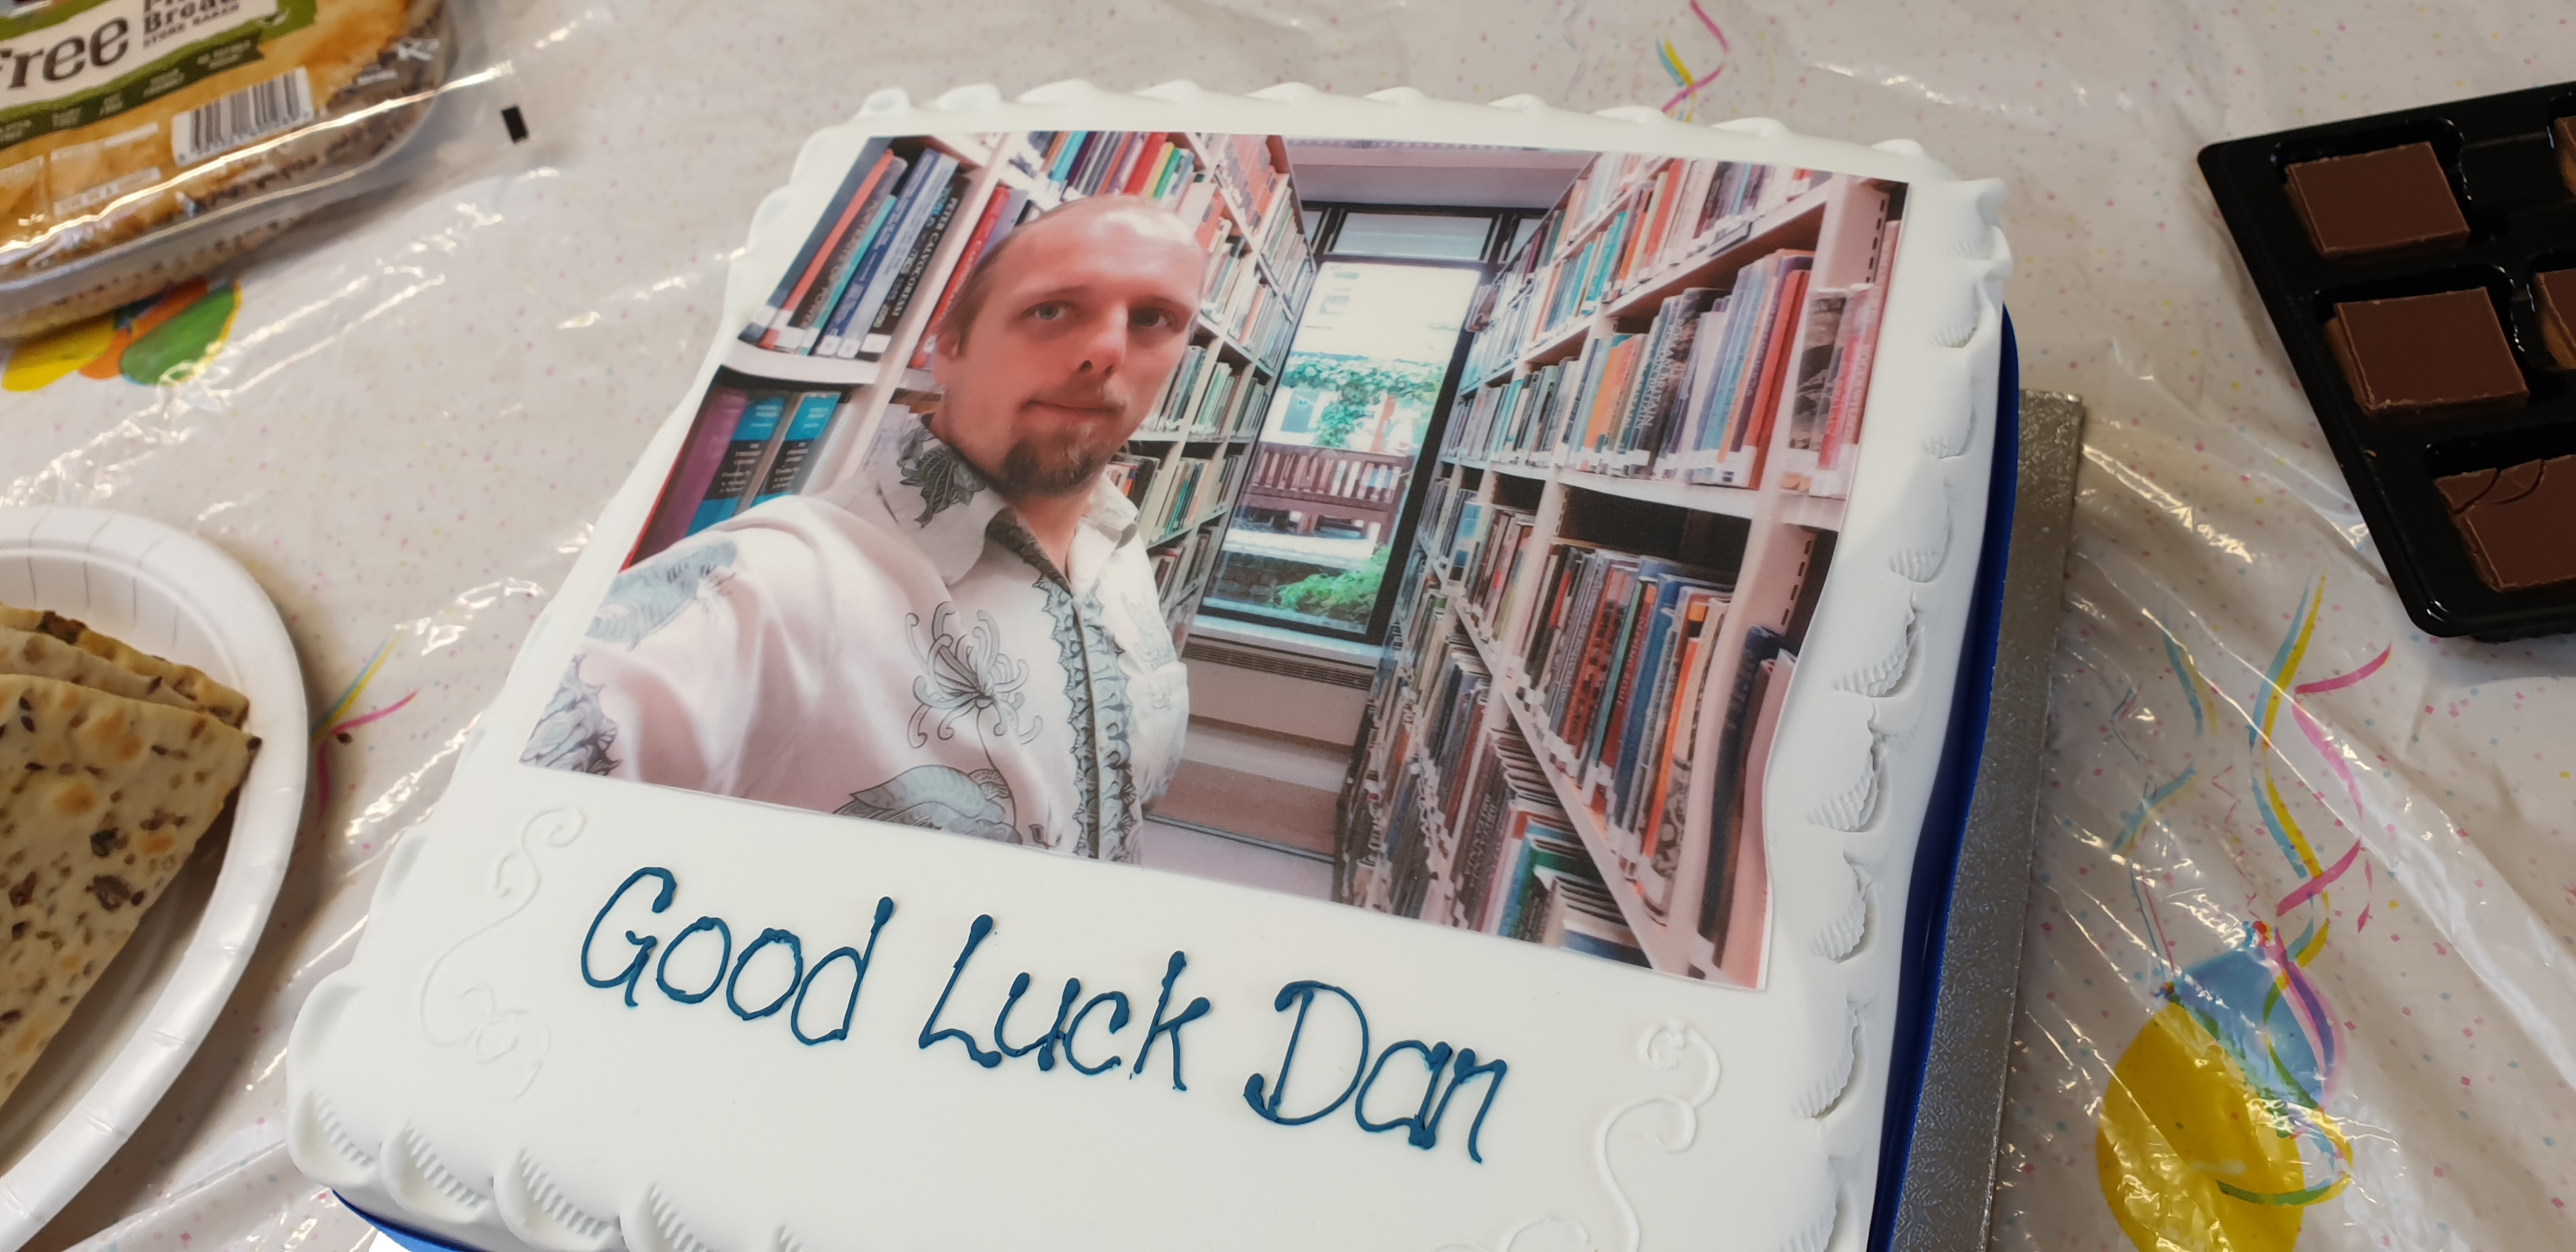 A cake with icing printed with a picture of Dan in a library. Beneath are iced the words "Good Luck Dan".